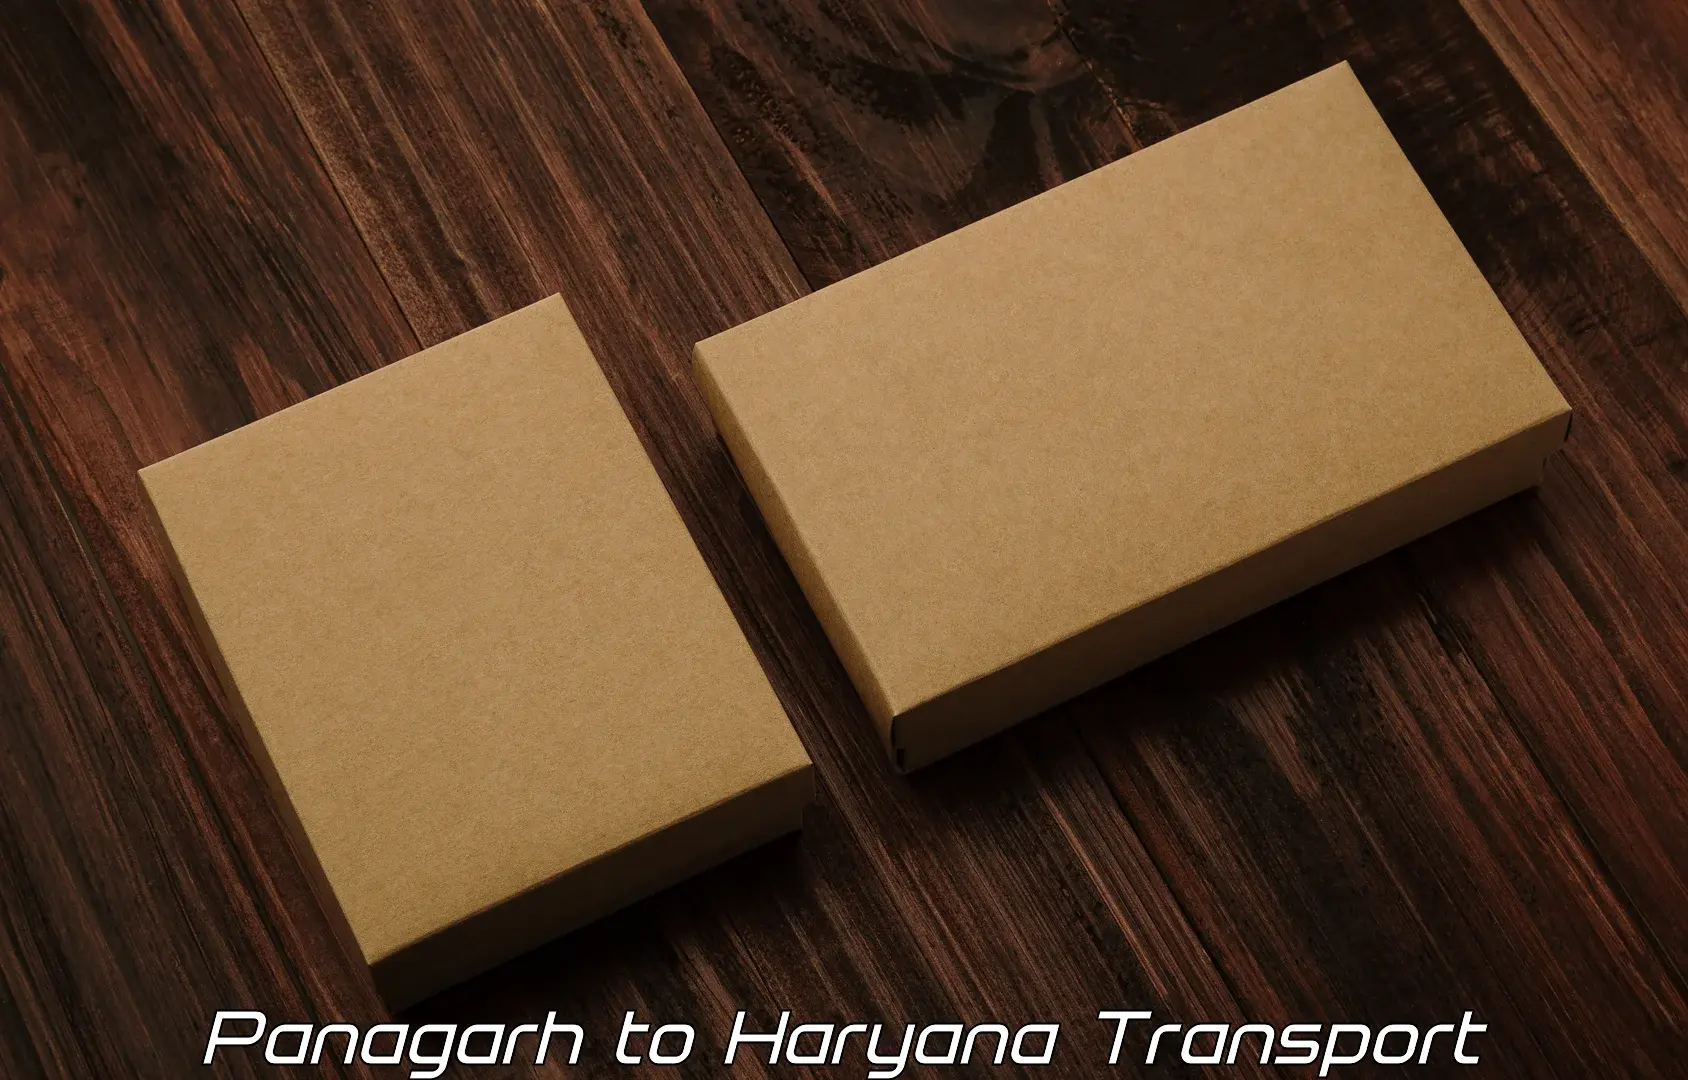 Goods delivery service Panagarh to Hansi